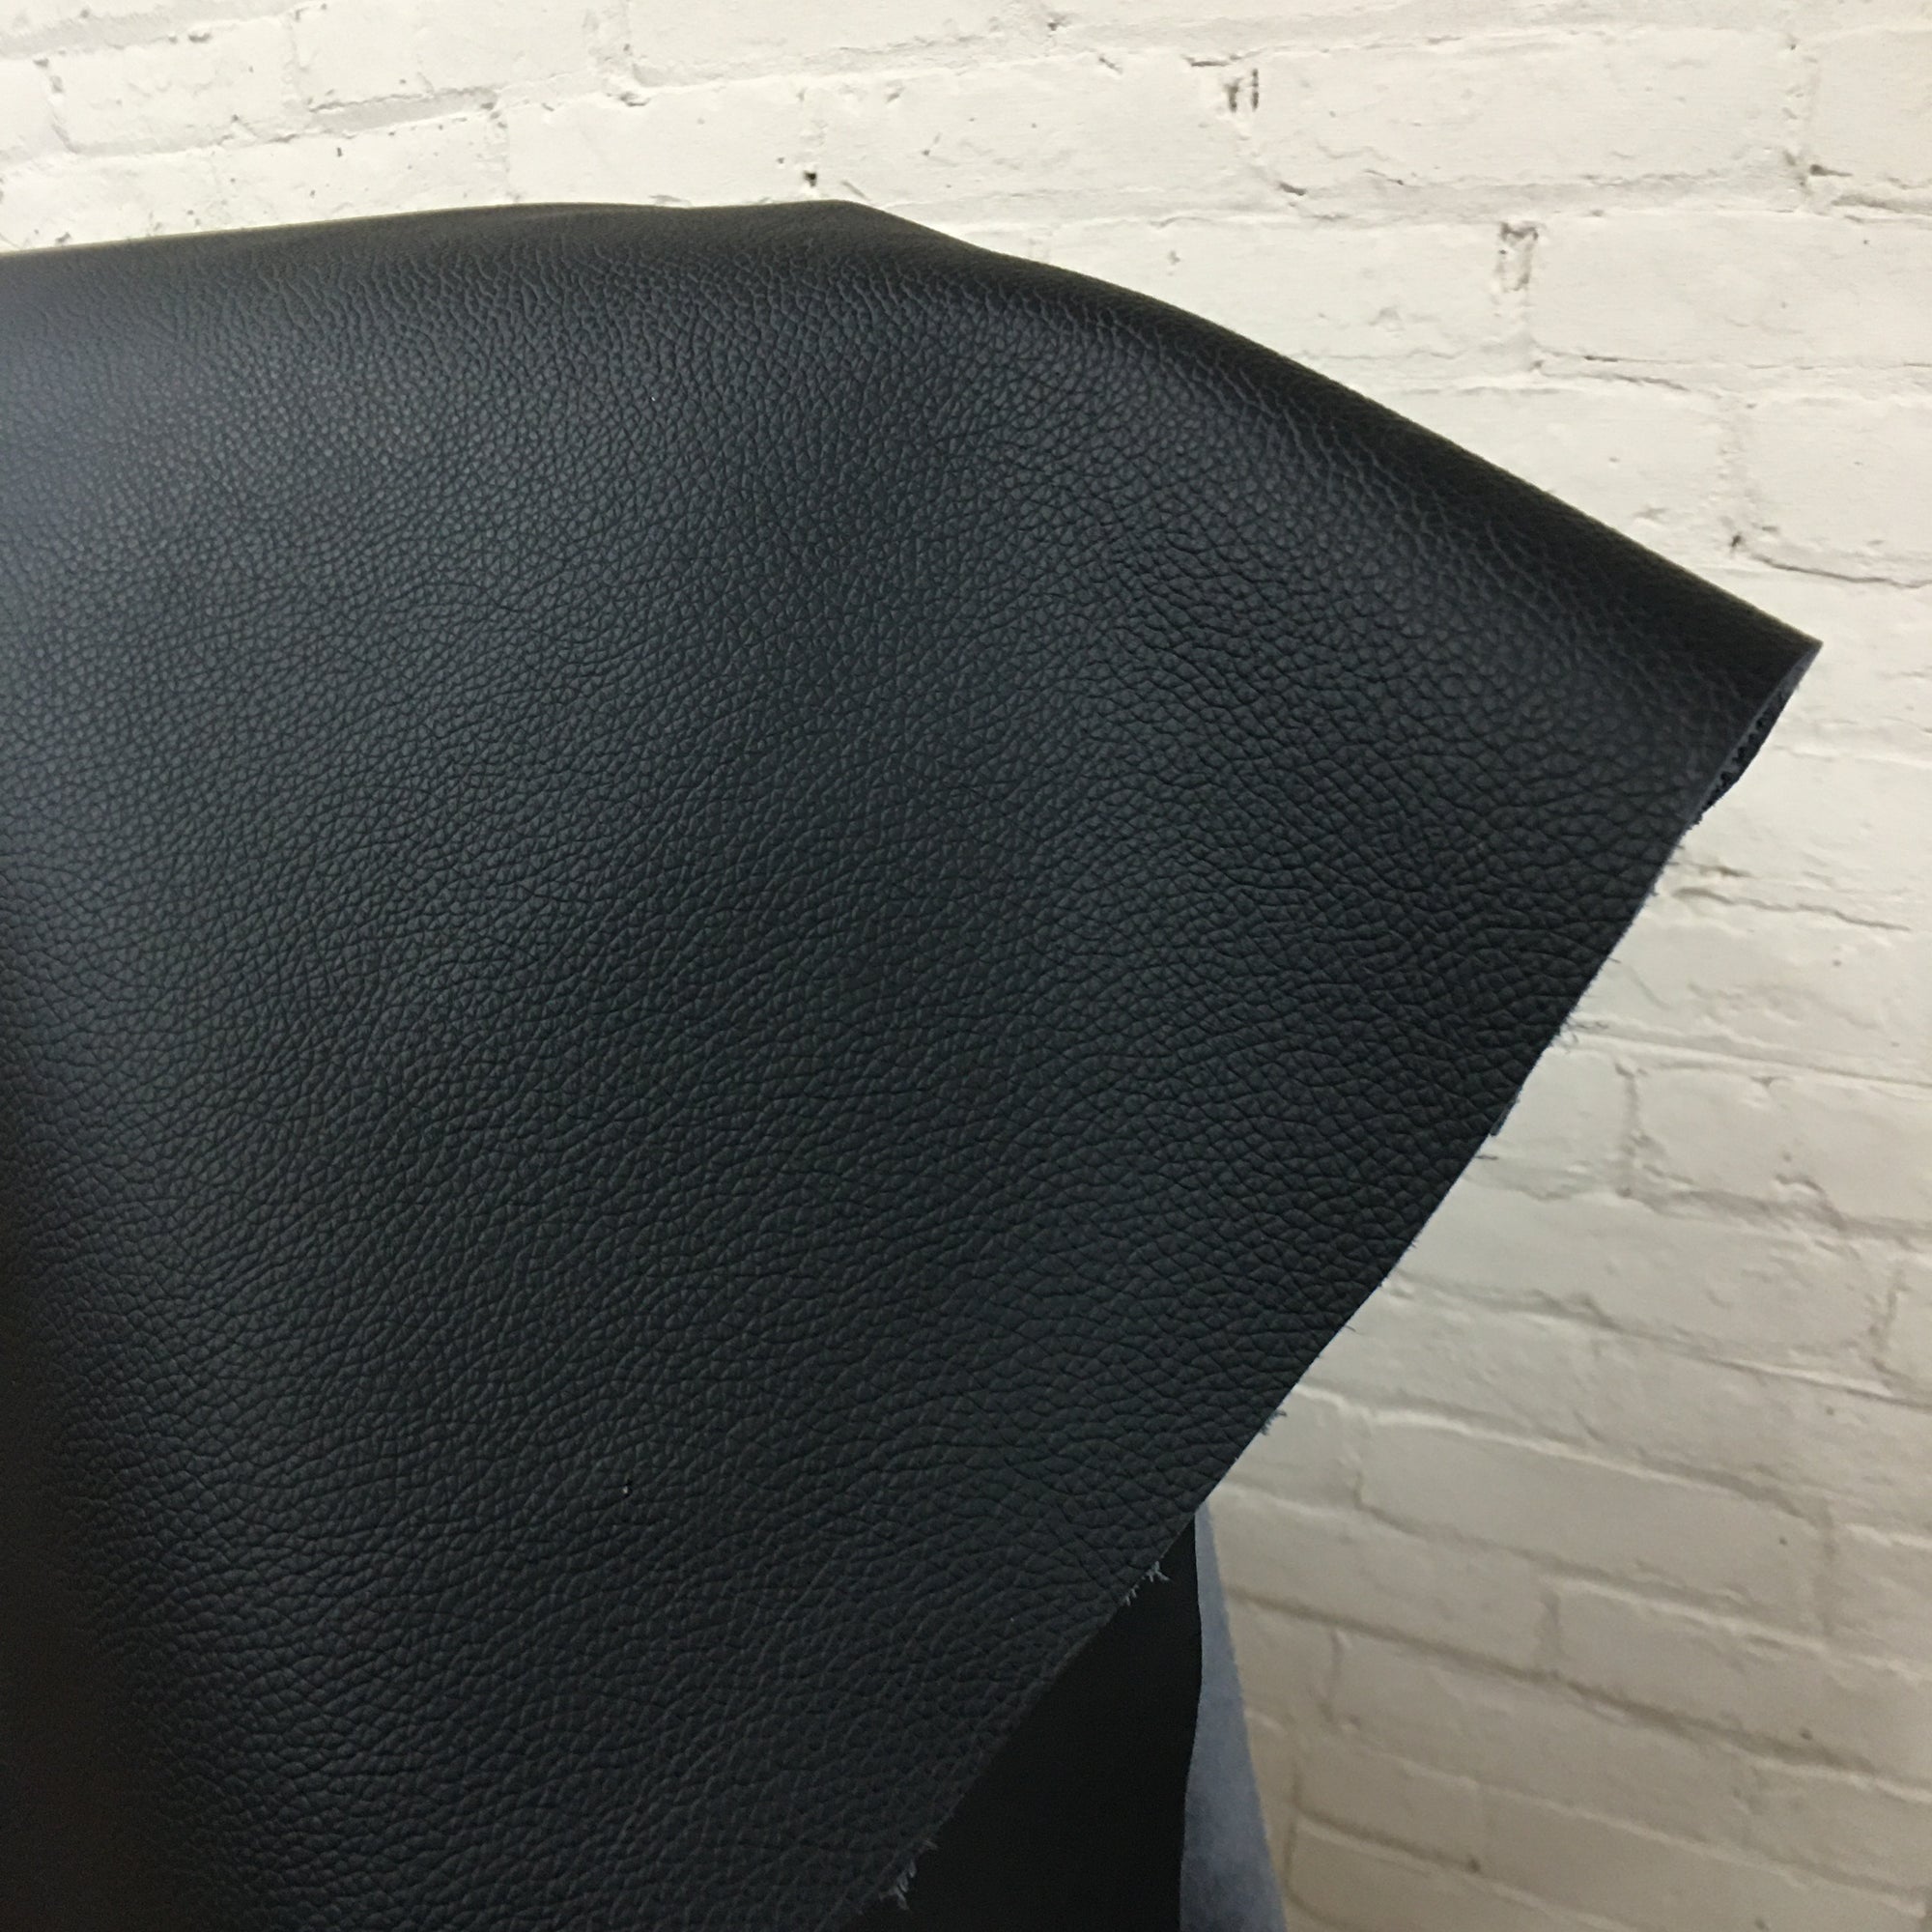 Matte Distressed Leather - Relicate